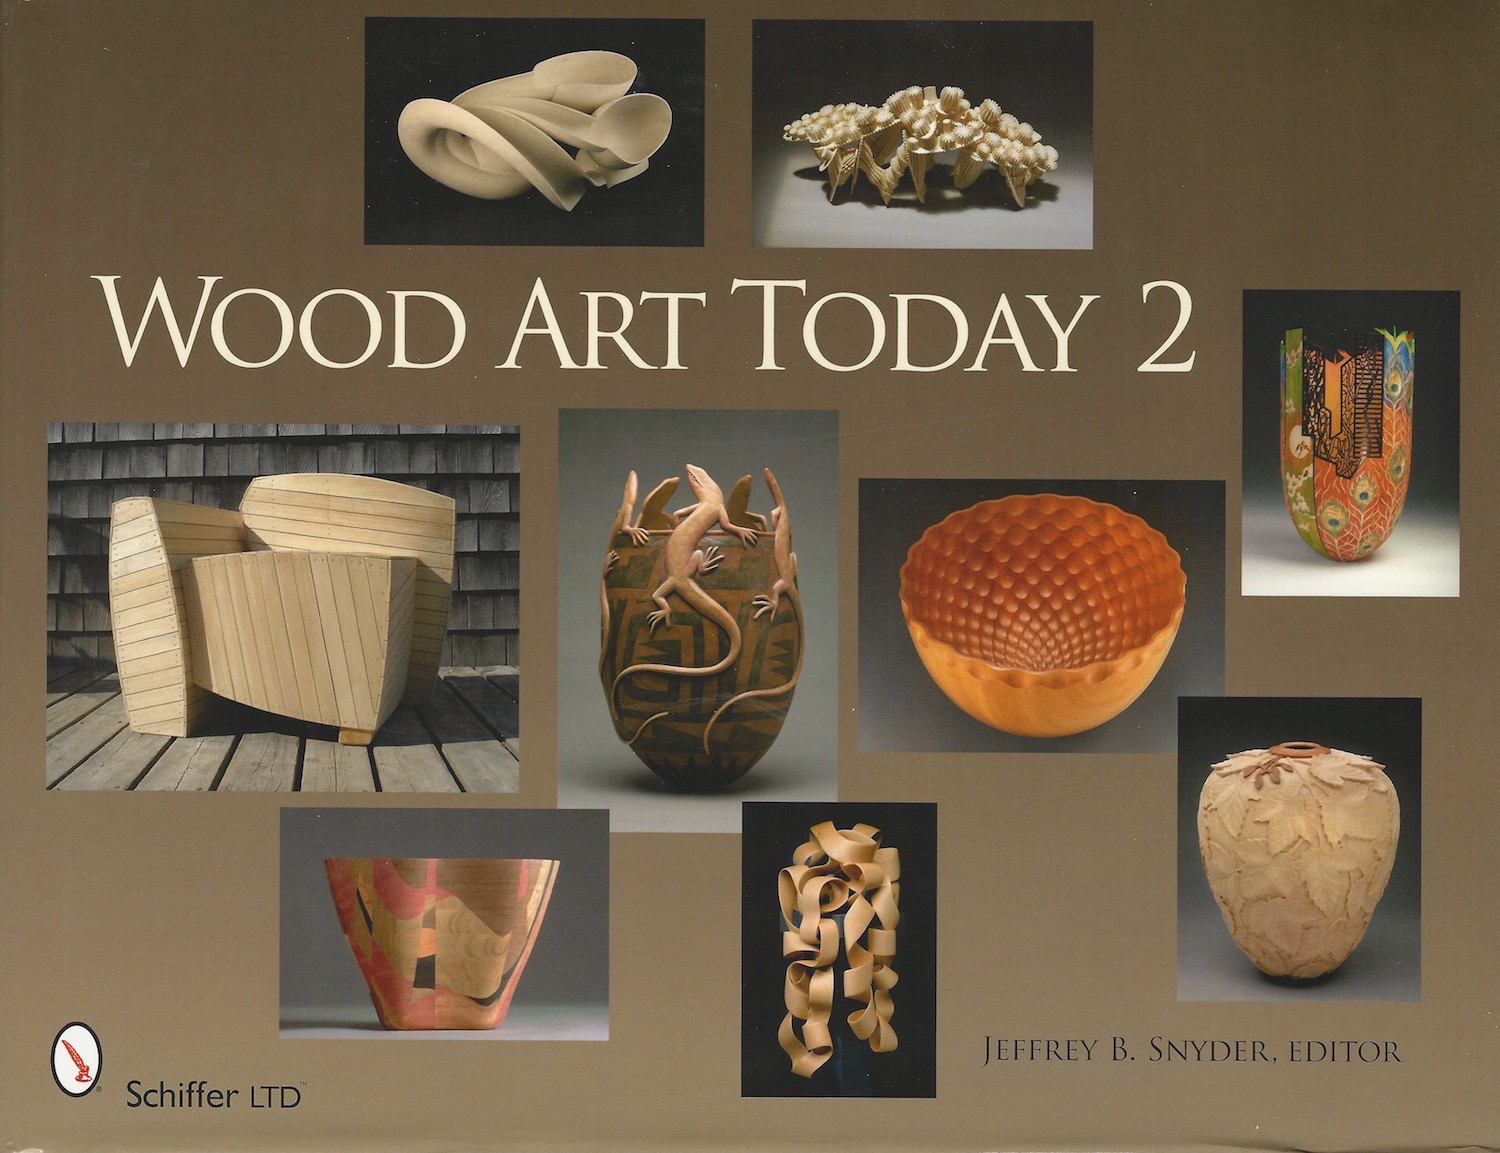 Wood Art Today cover 1.jpg